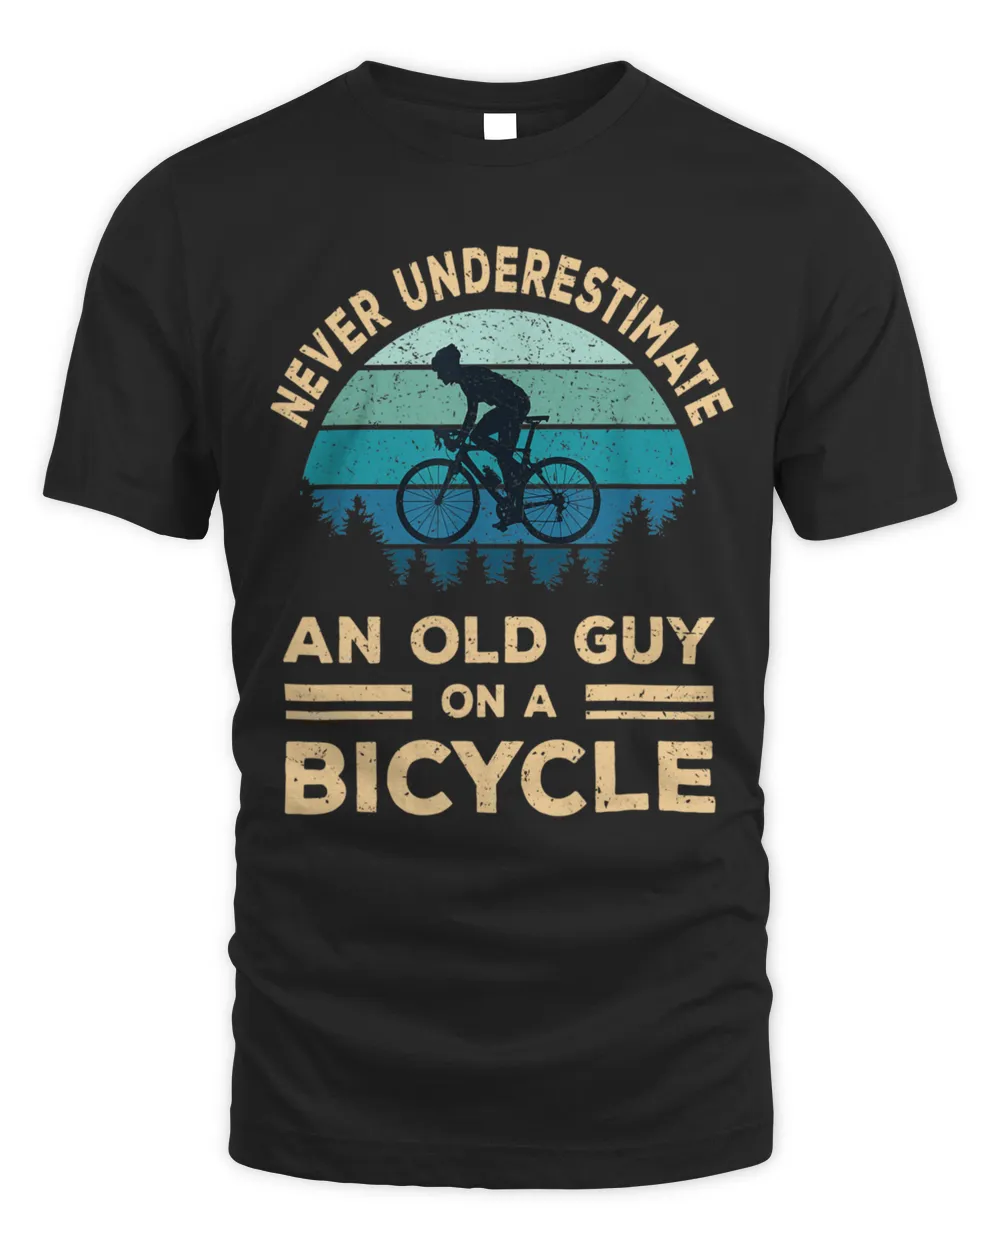 Never underestimate an old guy on a bicycle tees